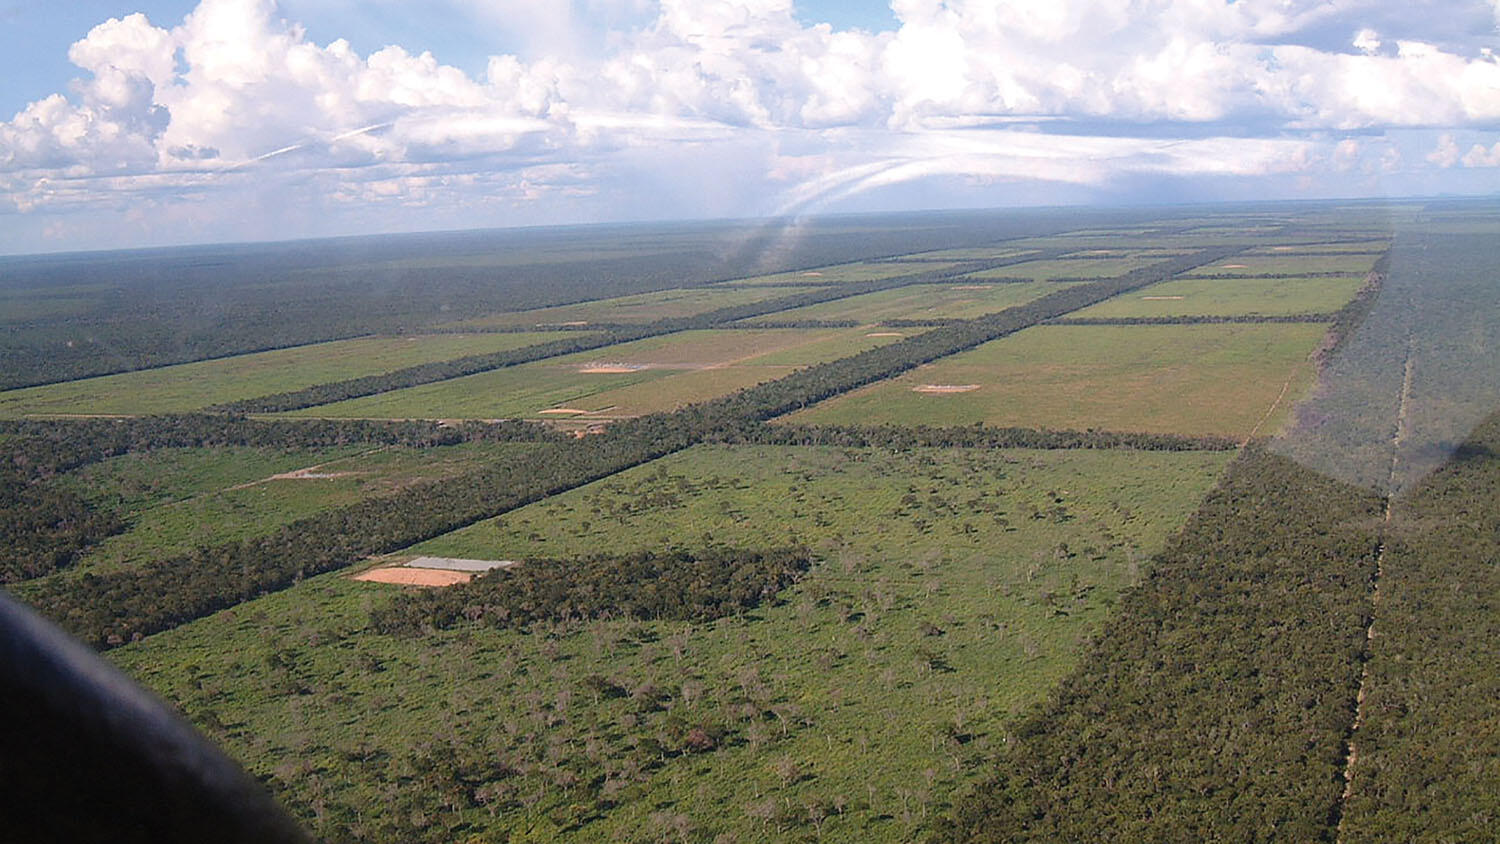 An aerial view of lands in Paraguay that have been deforested to make way for cattle ranches. (Photo by Peer V.)